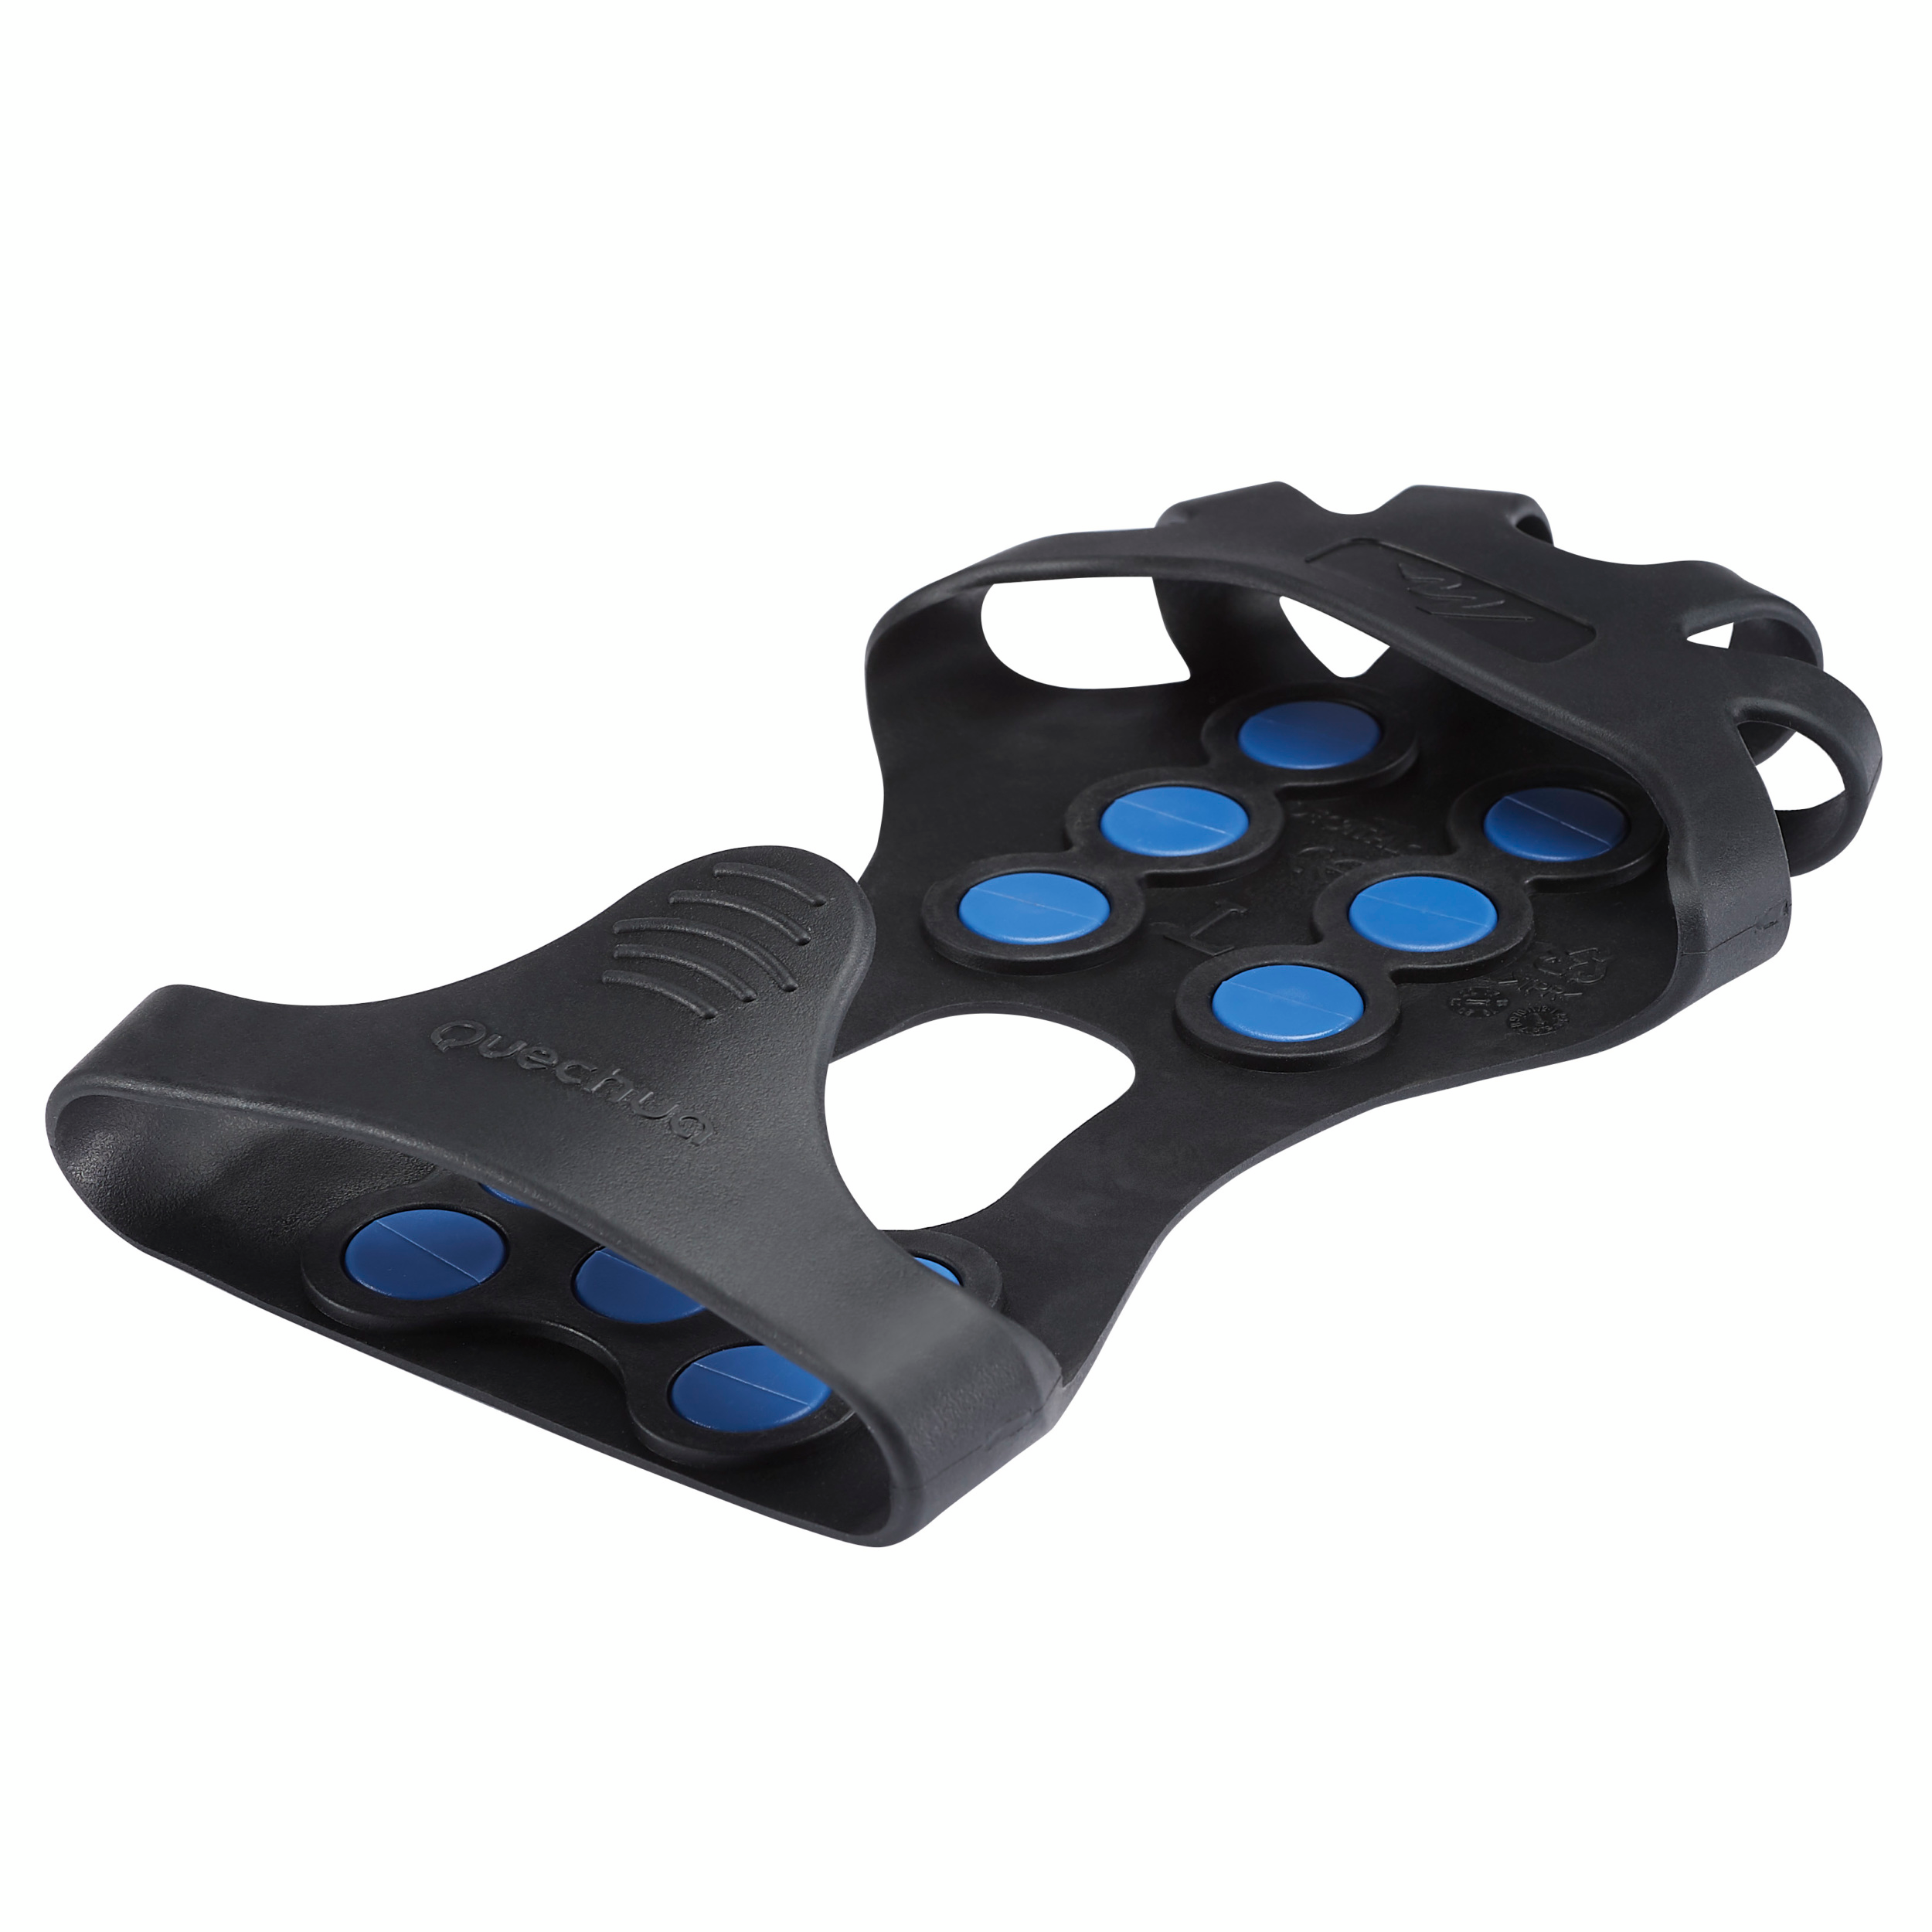 CRAMPONS XL grips antidérapants neige - (45/48)